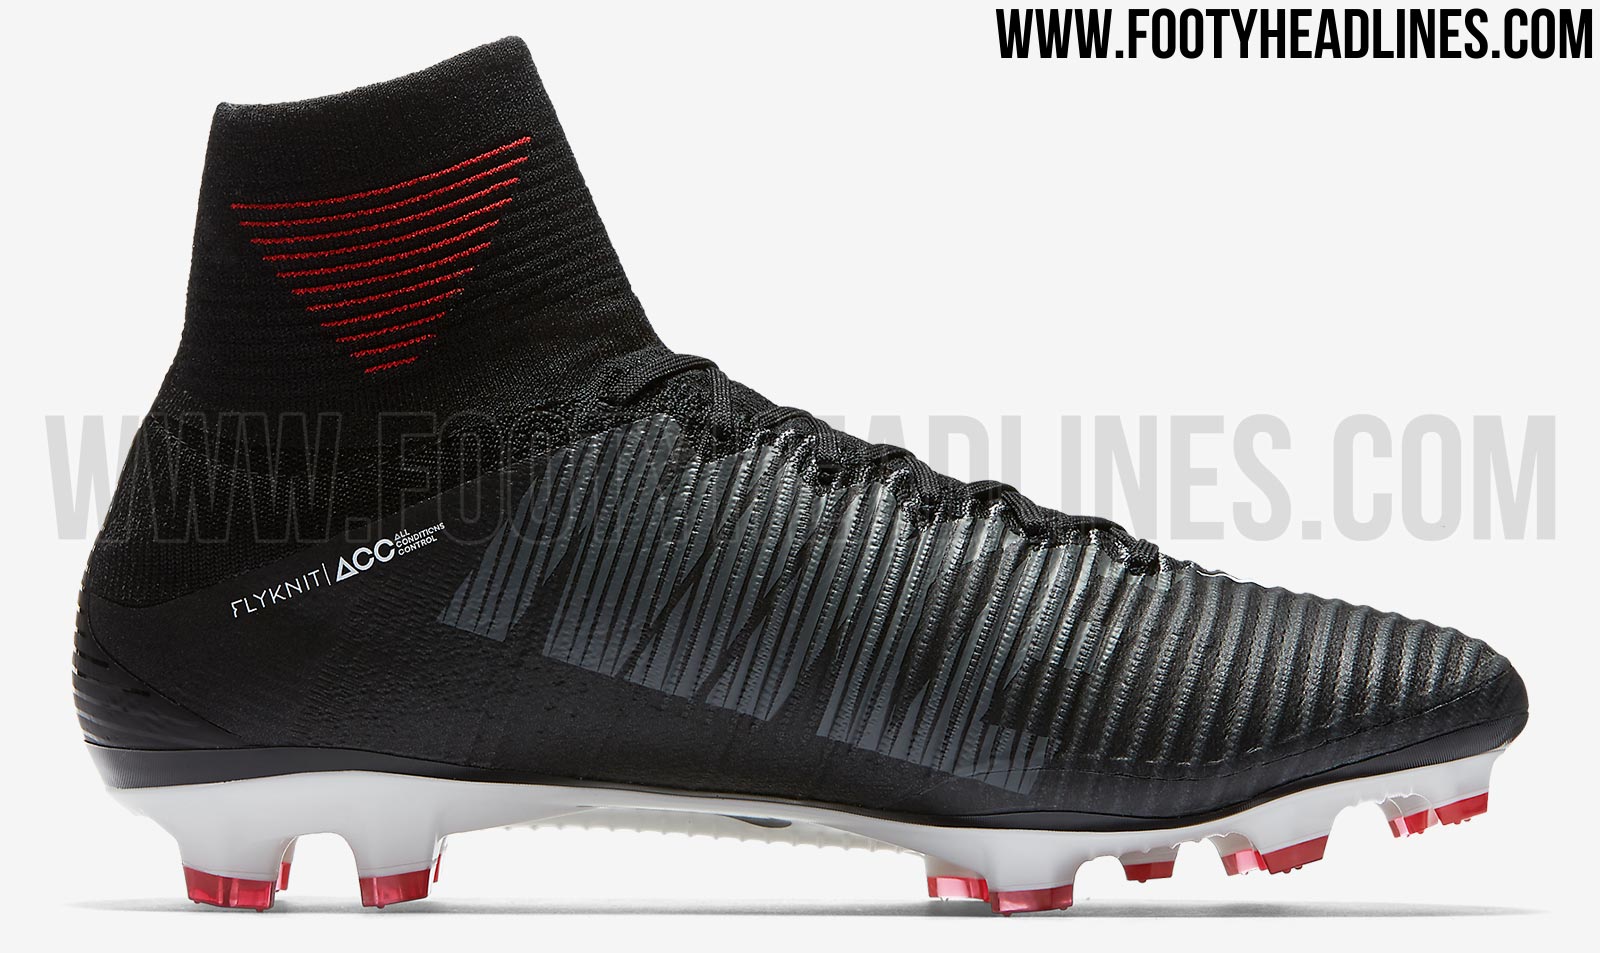 Nike Mercurial Superfly V Boots Leaked - Footy